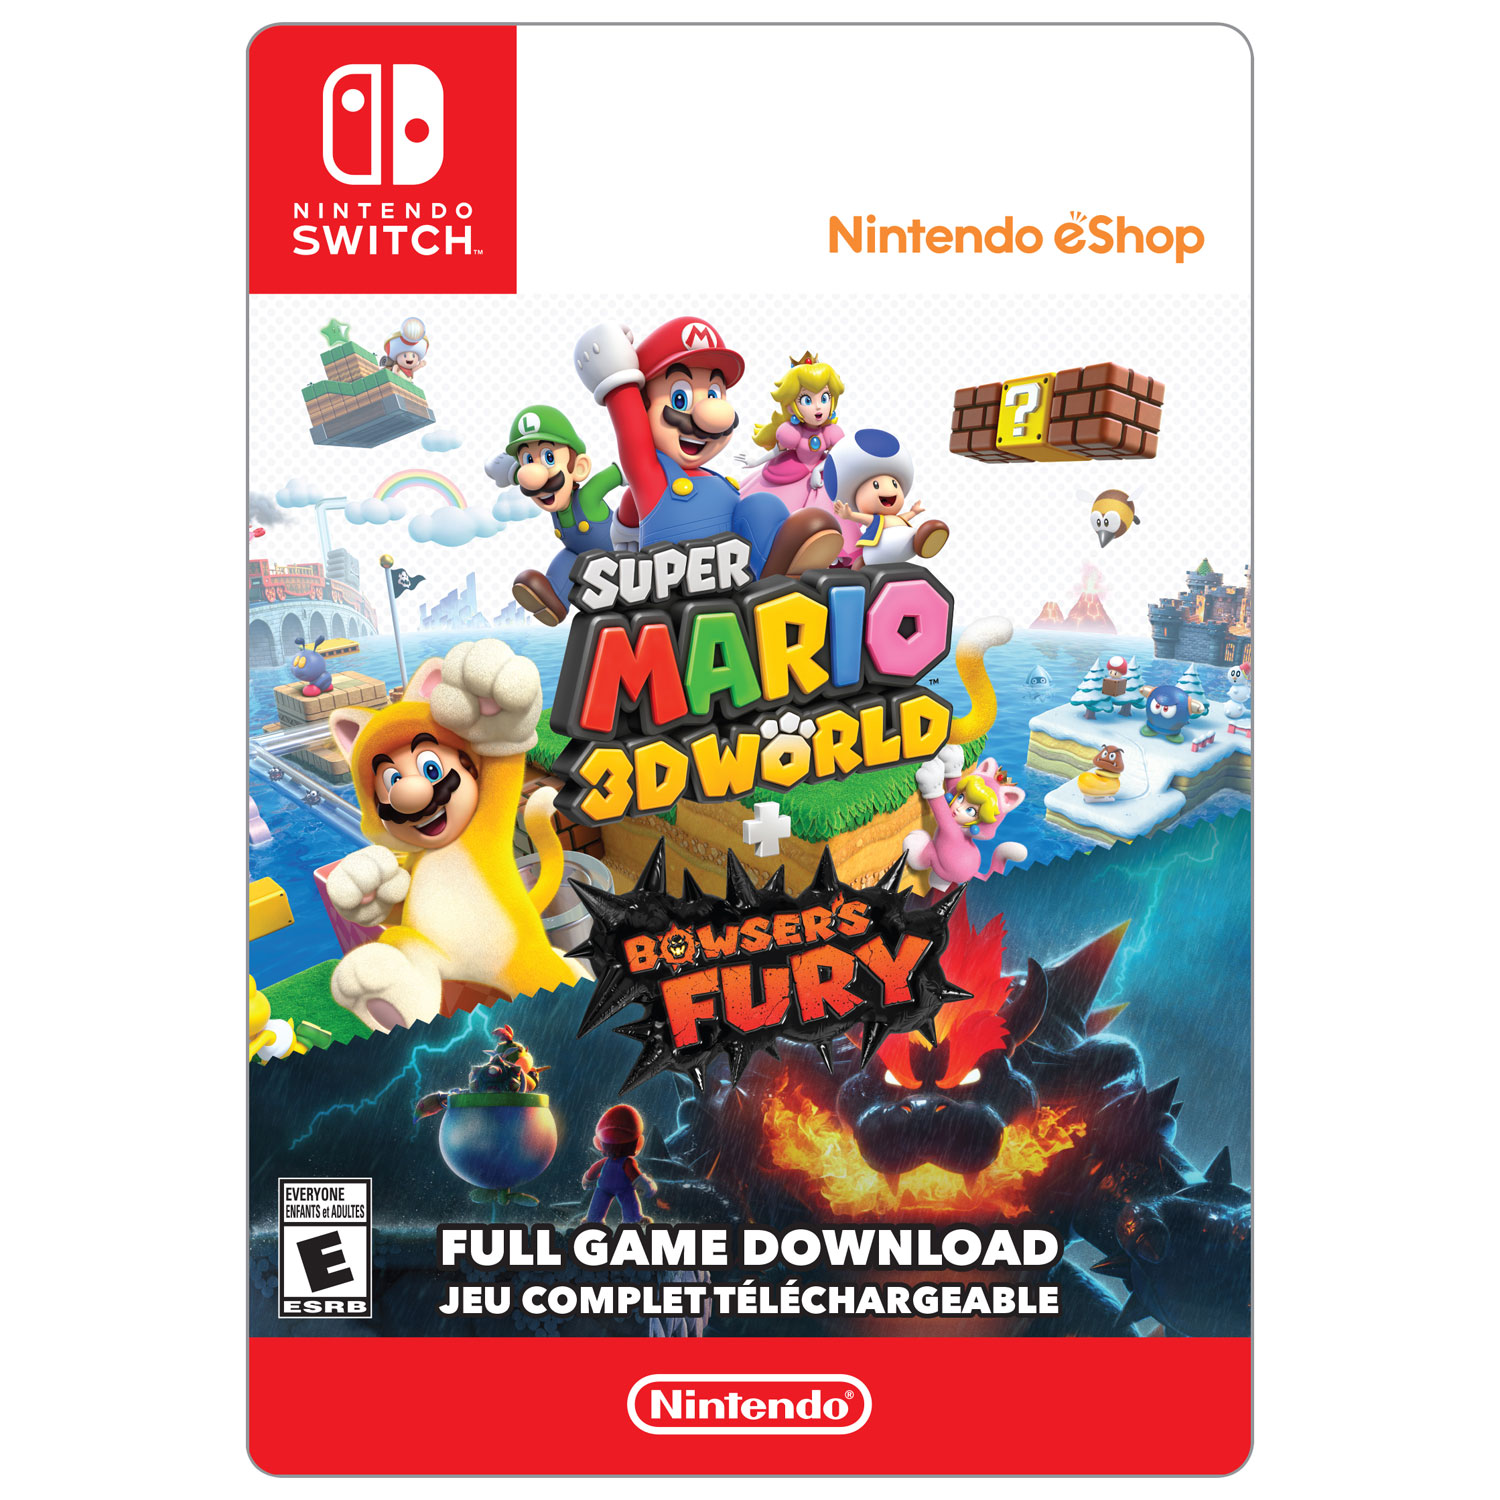 Super Mario 3D World + Bowser's Fury (Switch) - Digital Download